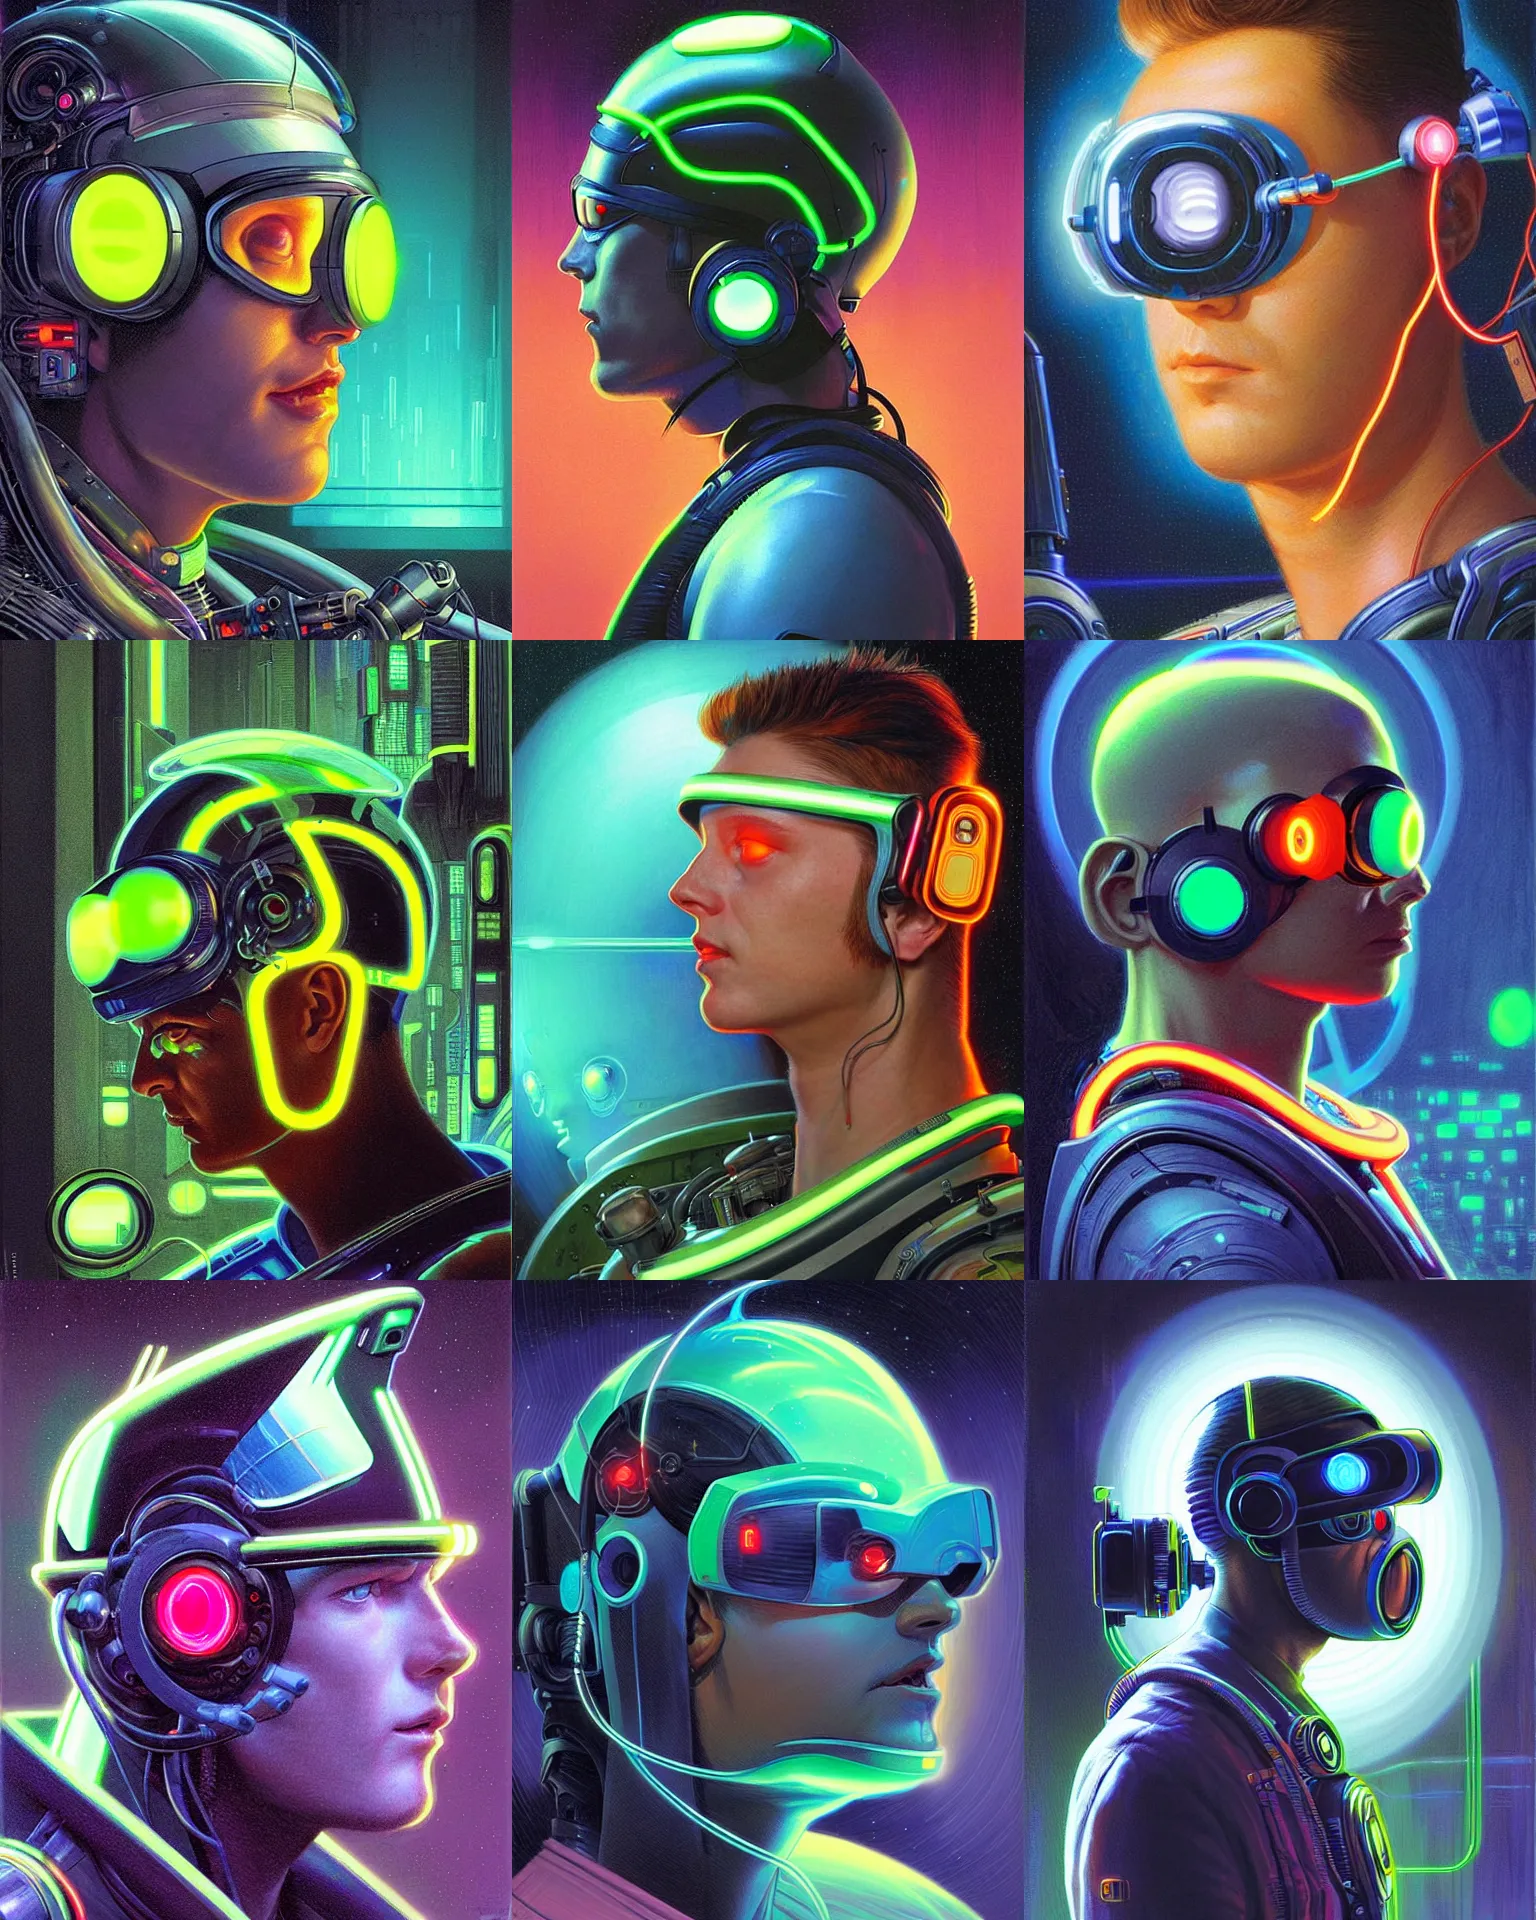 Prompt: sillouete side view future coder man, stylized cyclops display over eyes and sleek glowing headset, neon accents, holographic colors, desaturated headshot portrait digital painting by donato giancola, philip coles, ivan bilibin, john berkey, astronaut cyberpunk electric lights profile